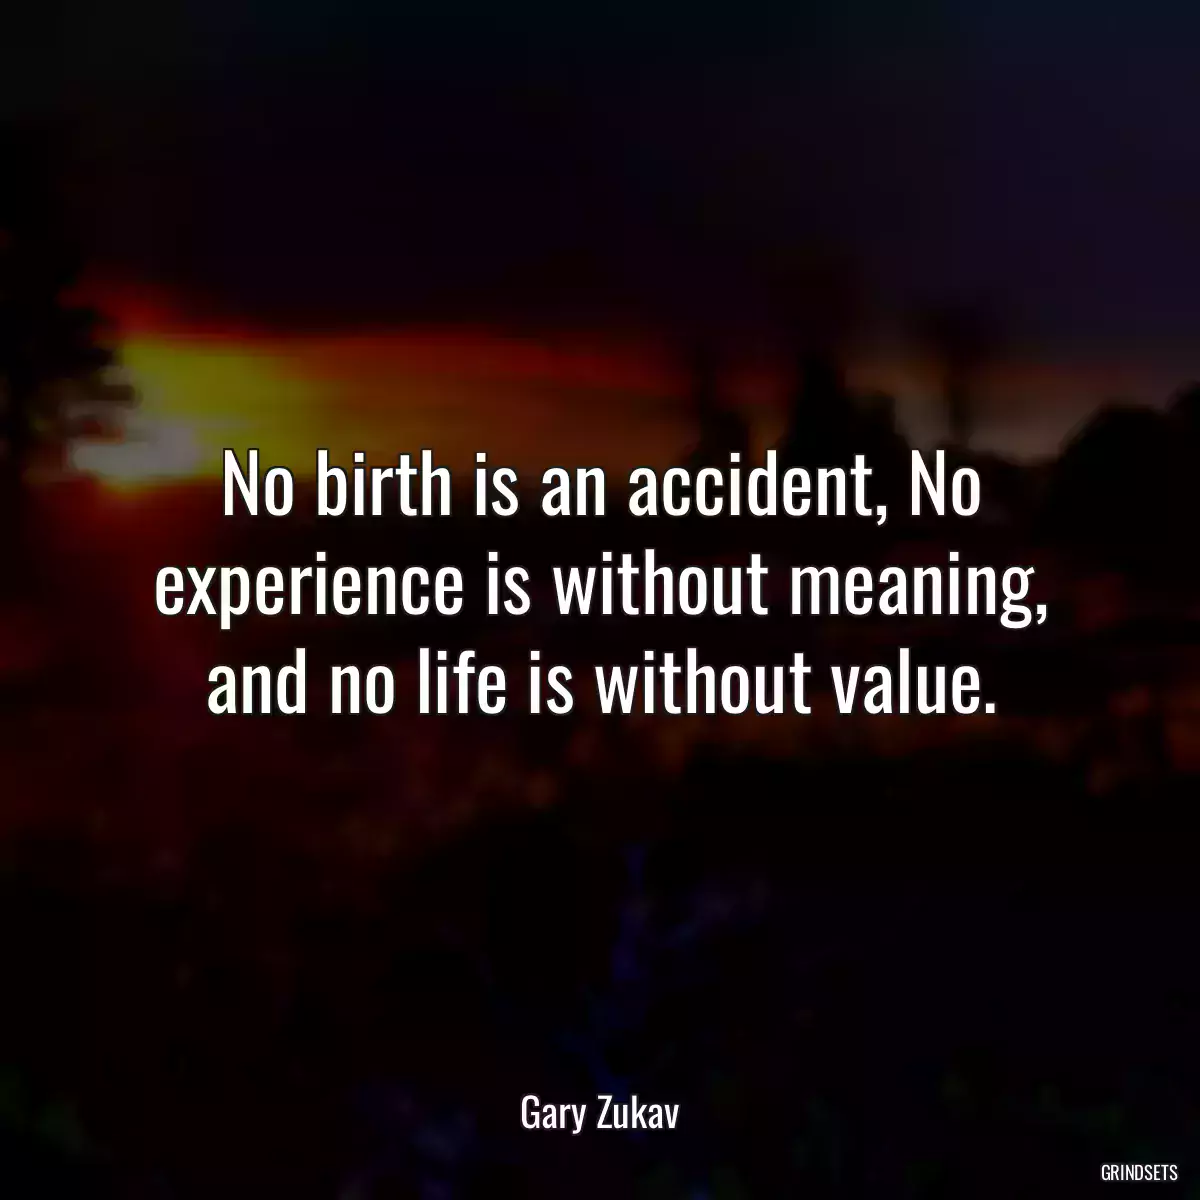 No birth is an accident, No experience is without meaning, and no life is without value.